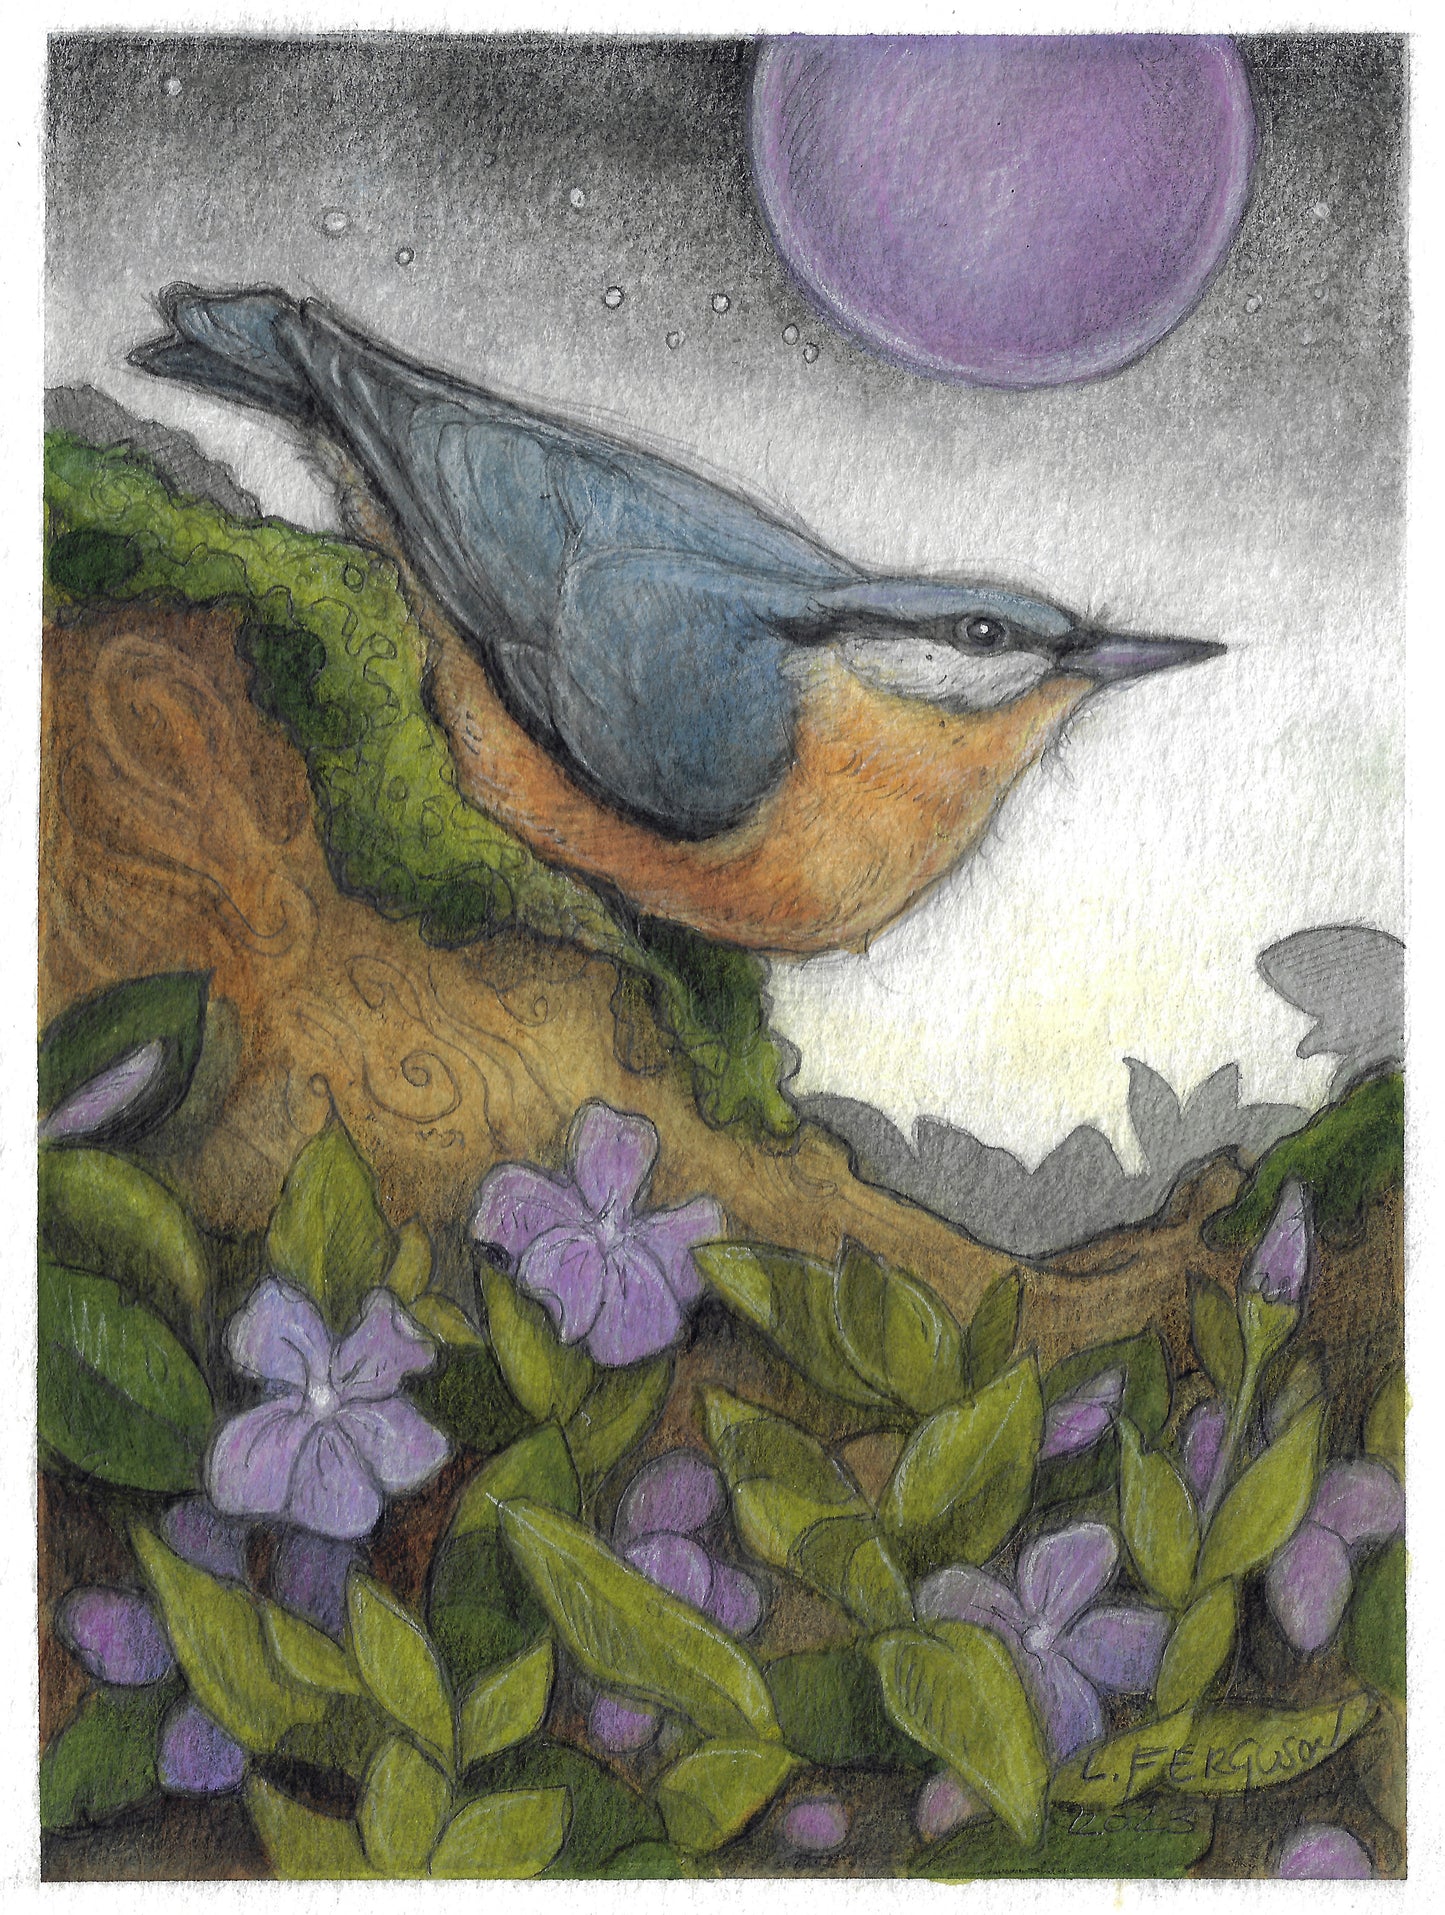 Rose Breasted Nuthatch-Original Mixed media Art